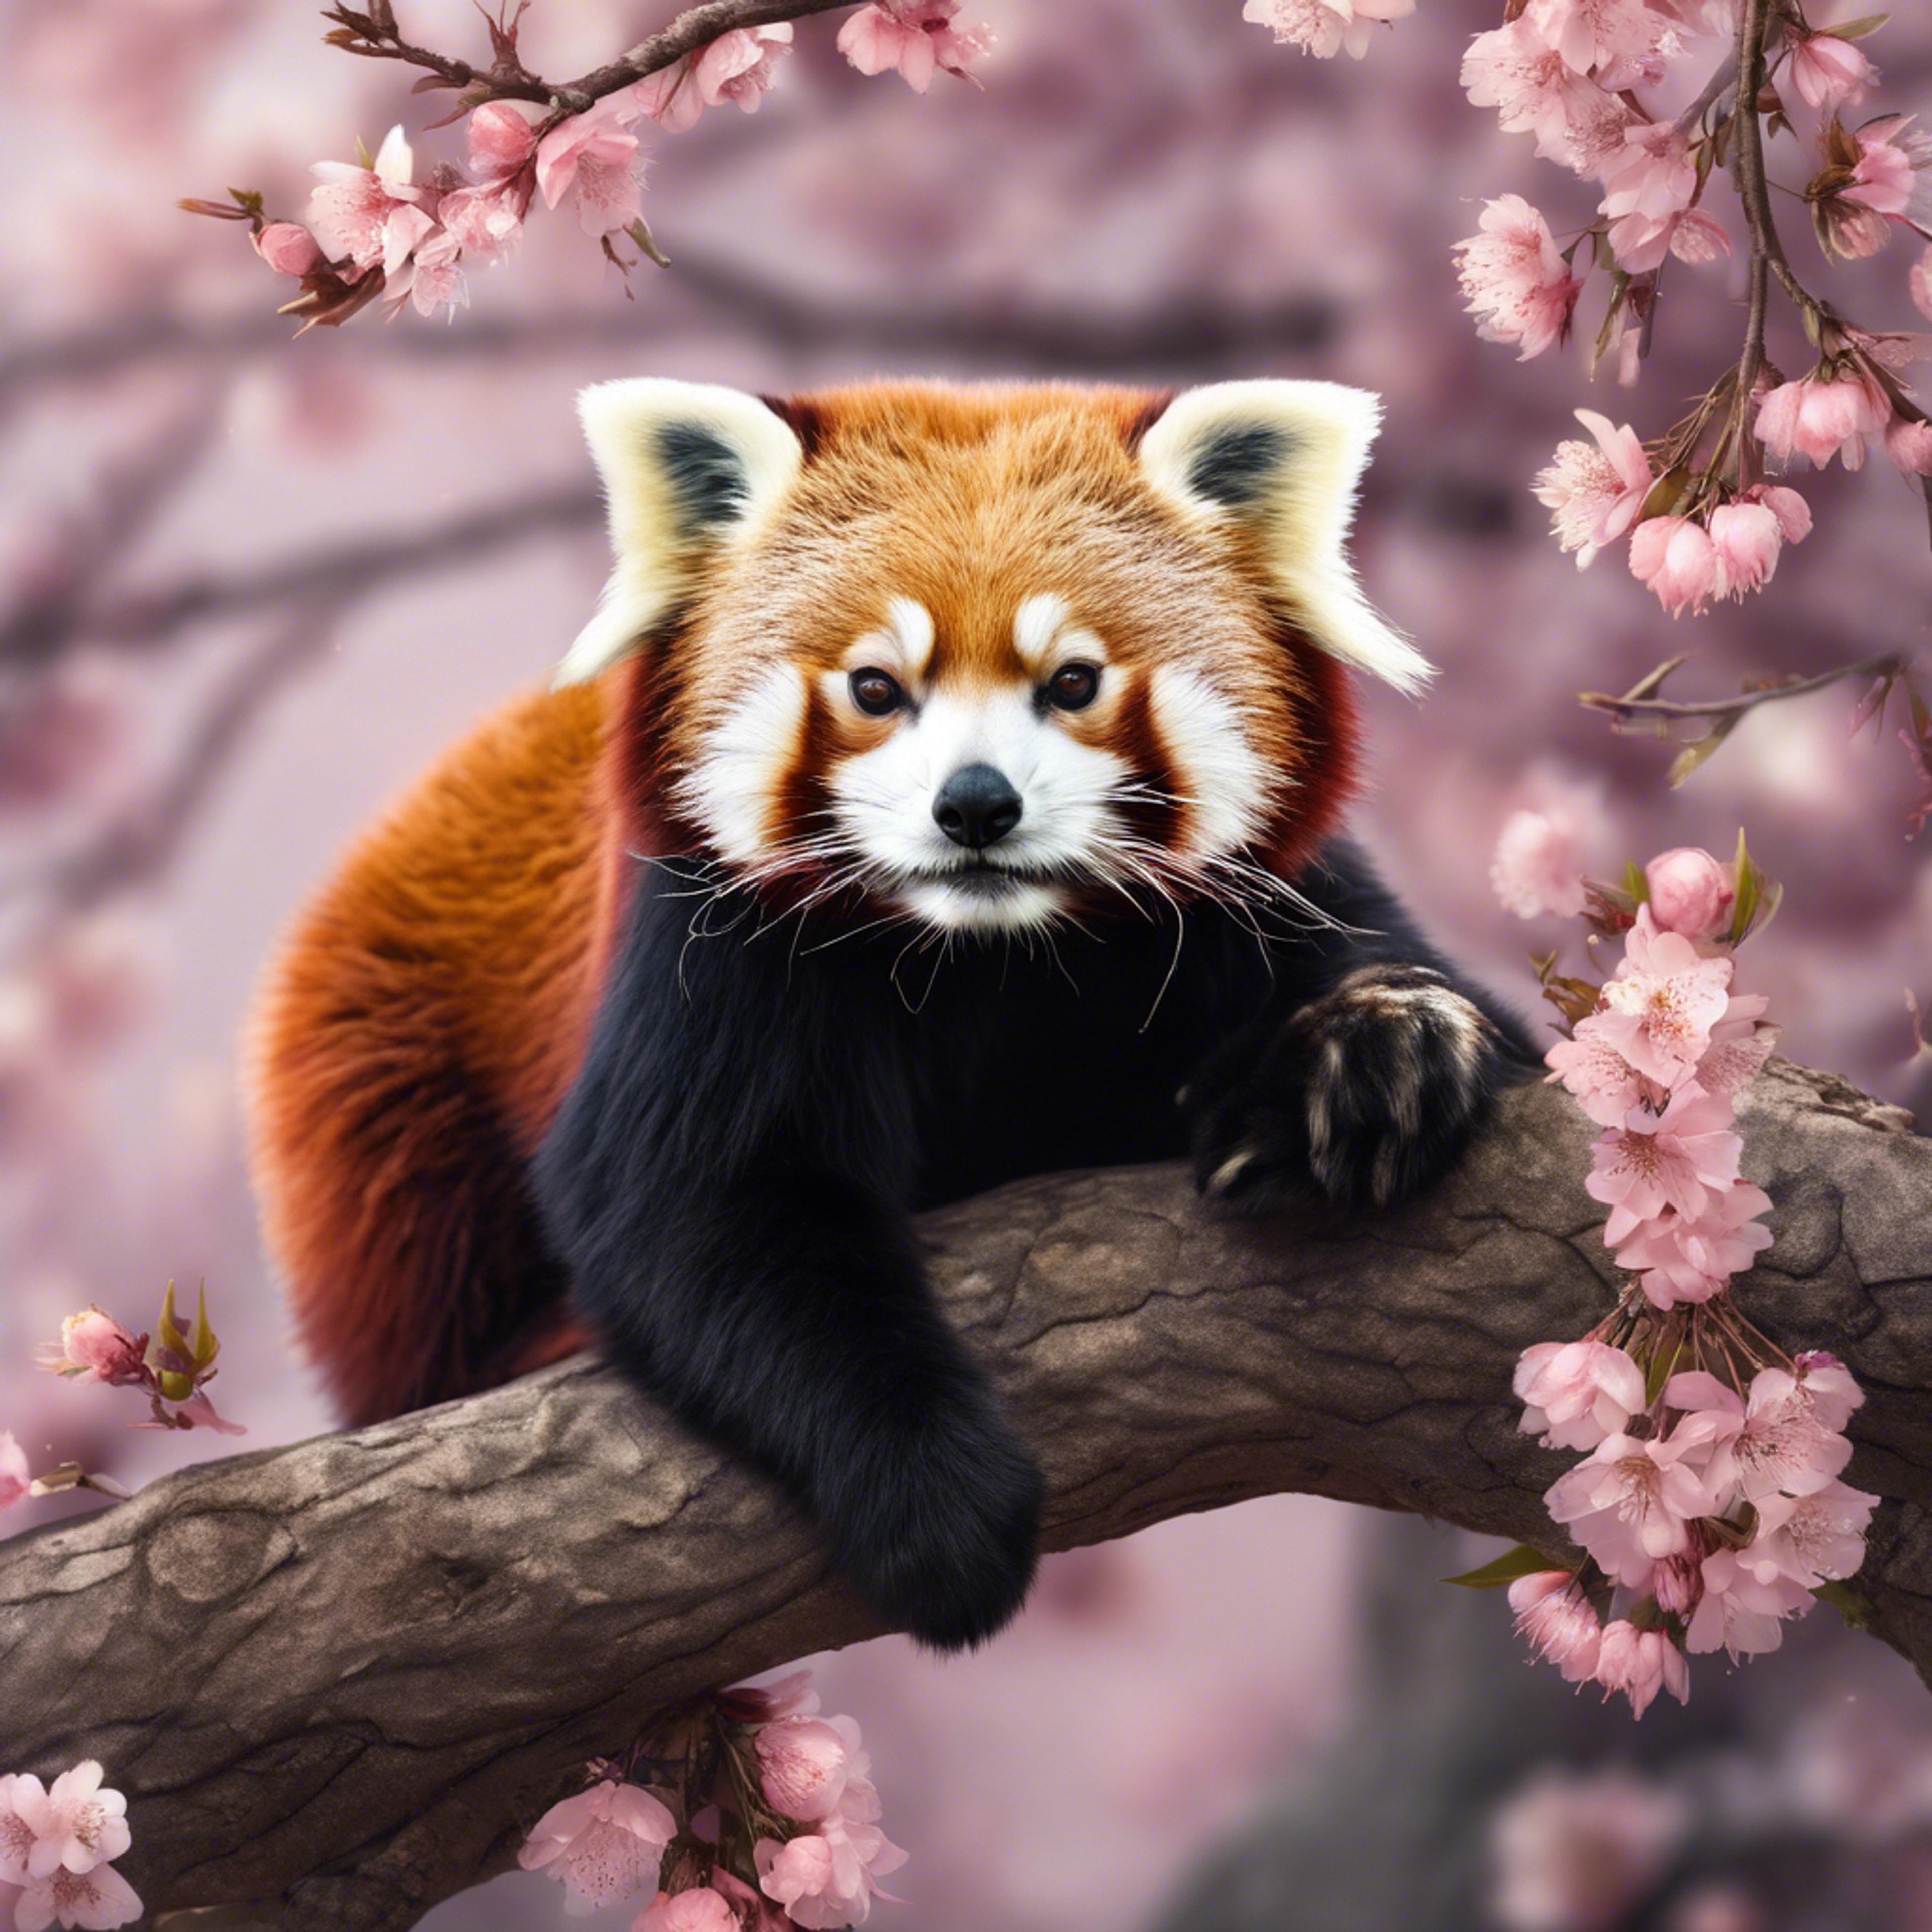 A red panda lounging lazily on a tree branch with a backdrop of blooming cherry blossoms. Papel de parede[422b6dc9464b43ba80b6]